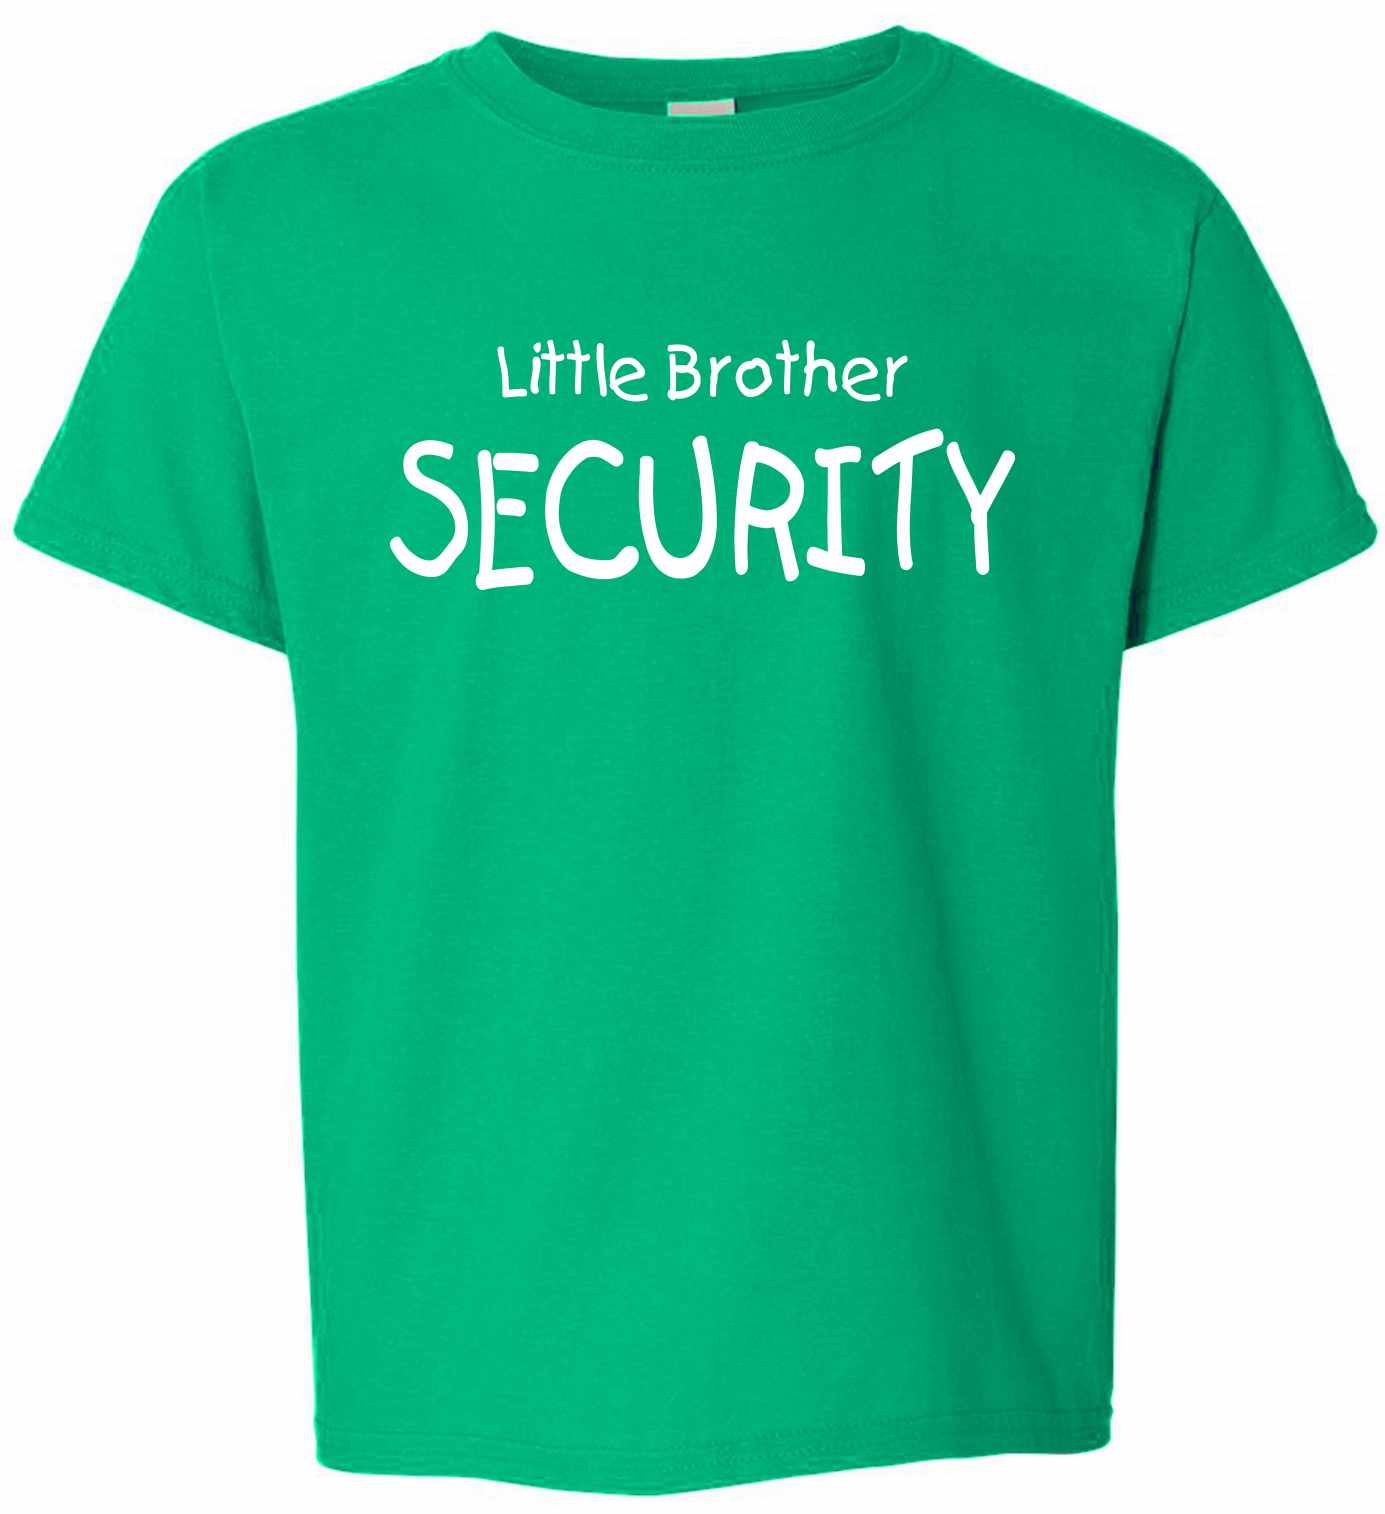 Little Brother Security on Kids T-Shirt (#972-201)